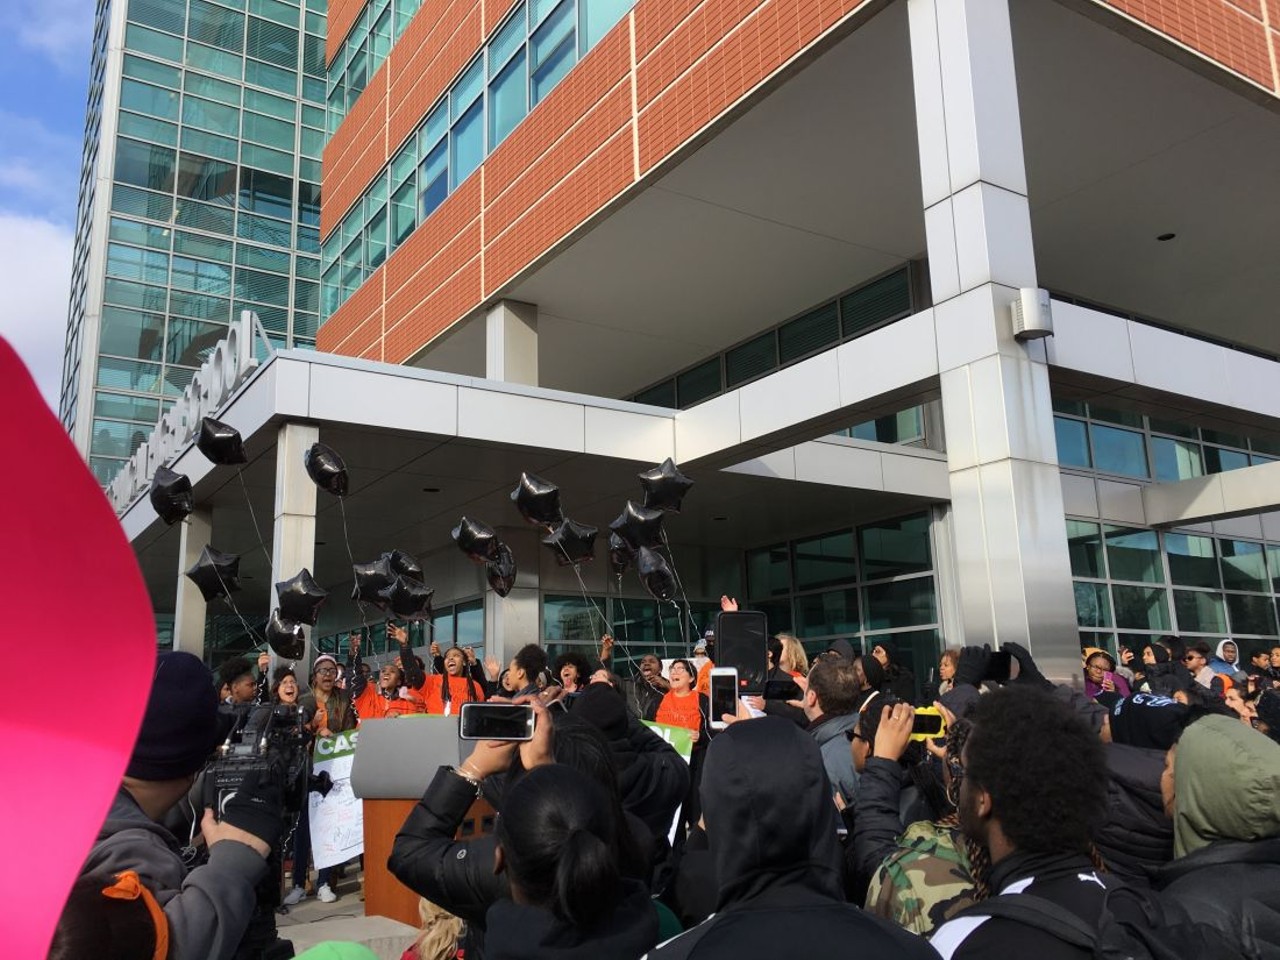 Photos from the National School Walkout Day protest at Cass Technical High School